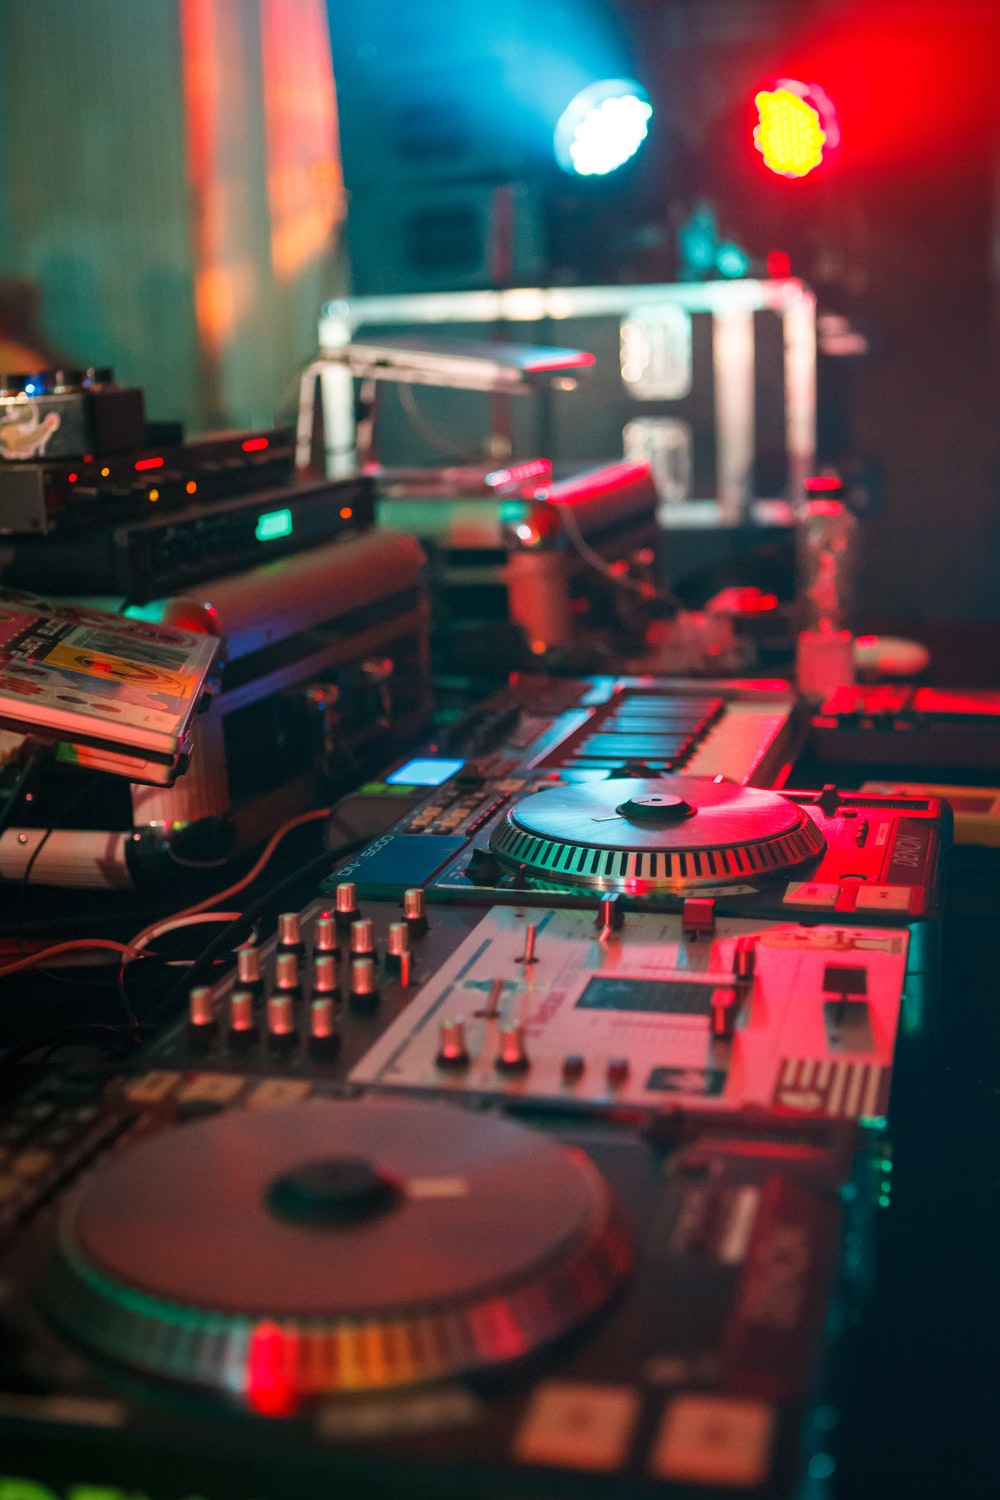 Dj Equipment Picture. Download Free Image